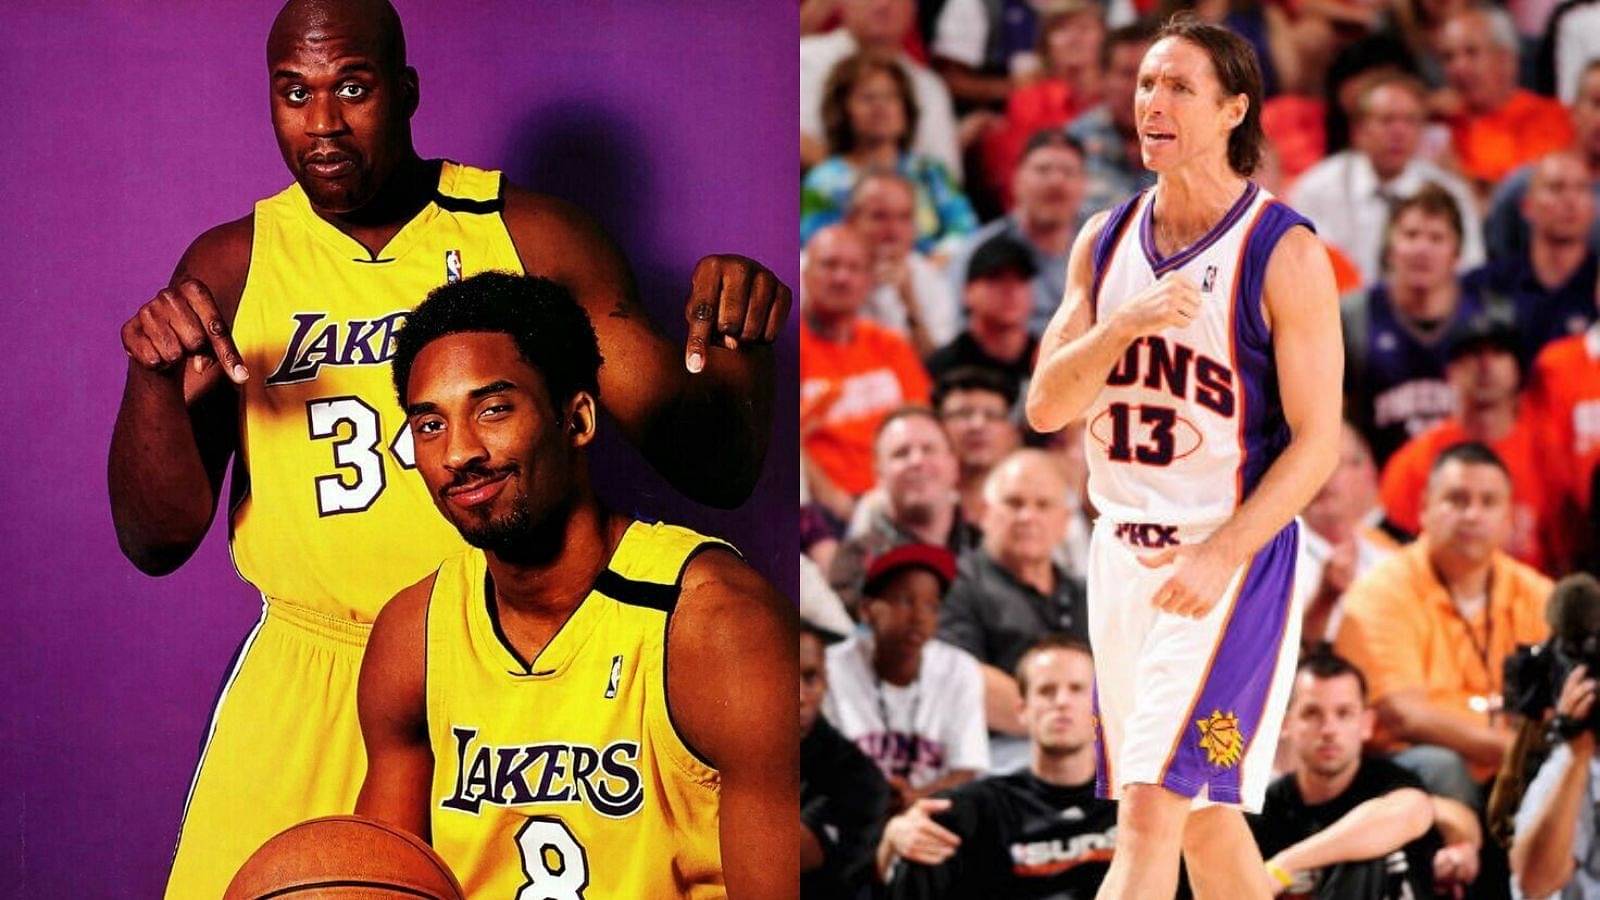 "Steve Nash has same amount of MVPs as Kobe Bryant and Shaq O’Neal combined": NBA Twitter brings forward a fact that puts the league and it's MVP selection process to shame